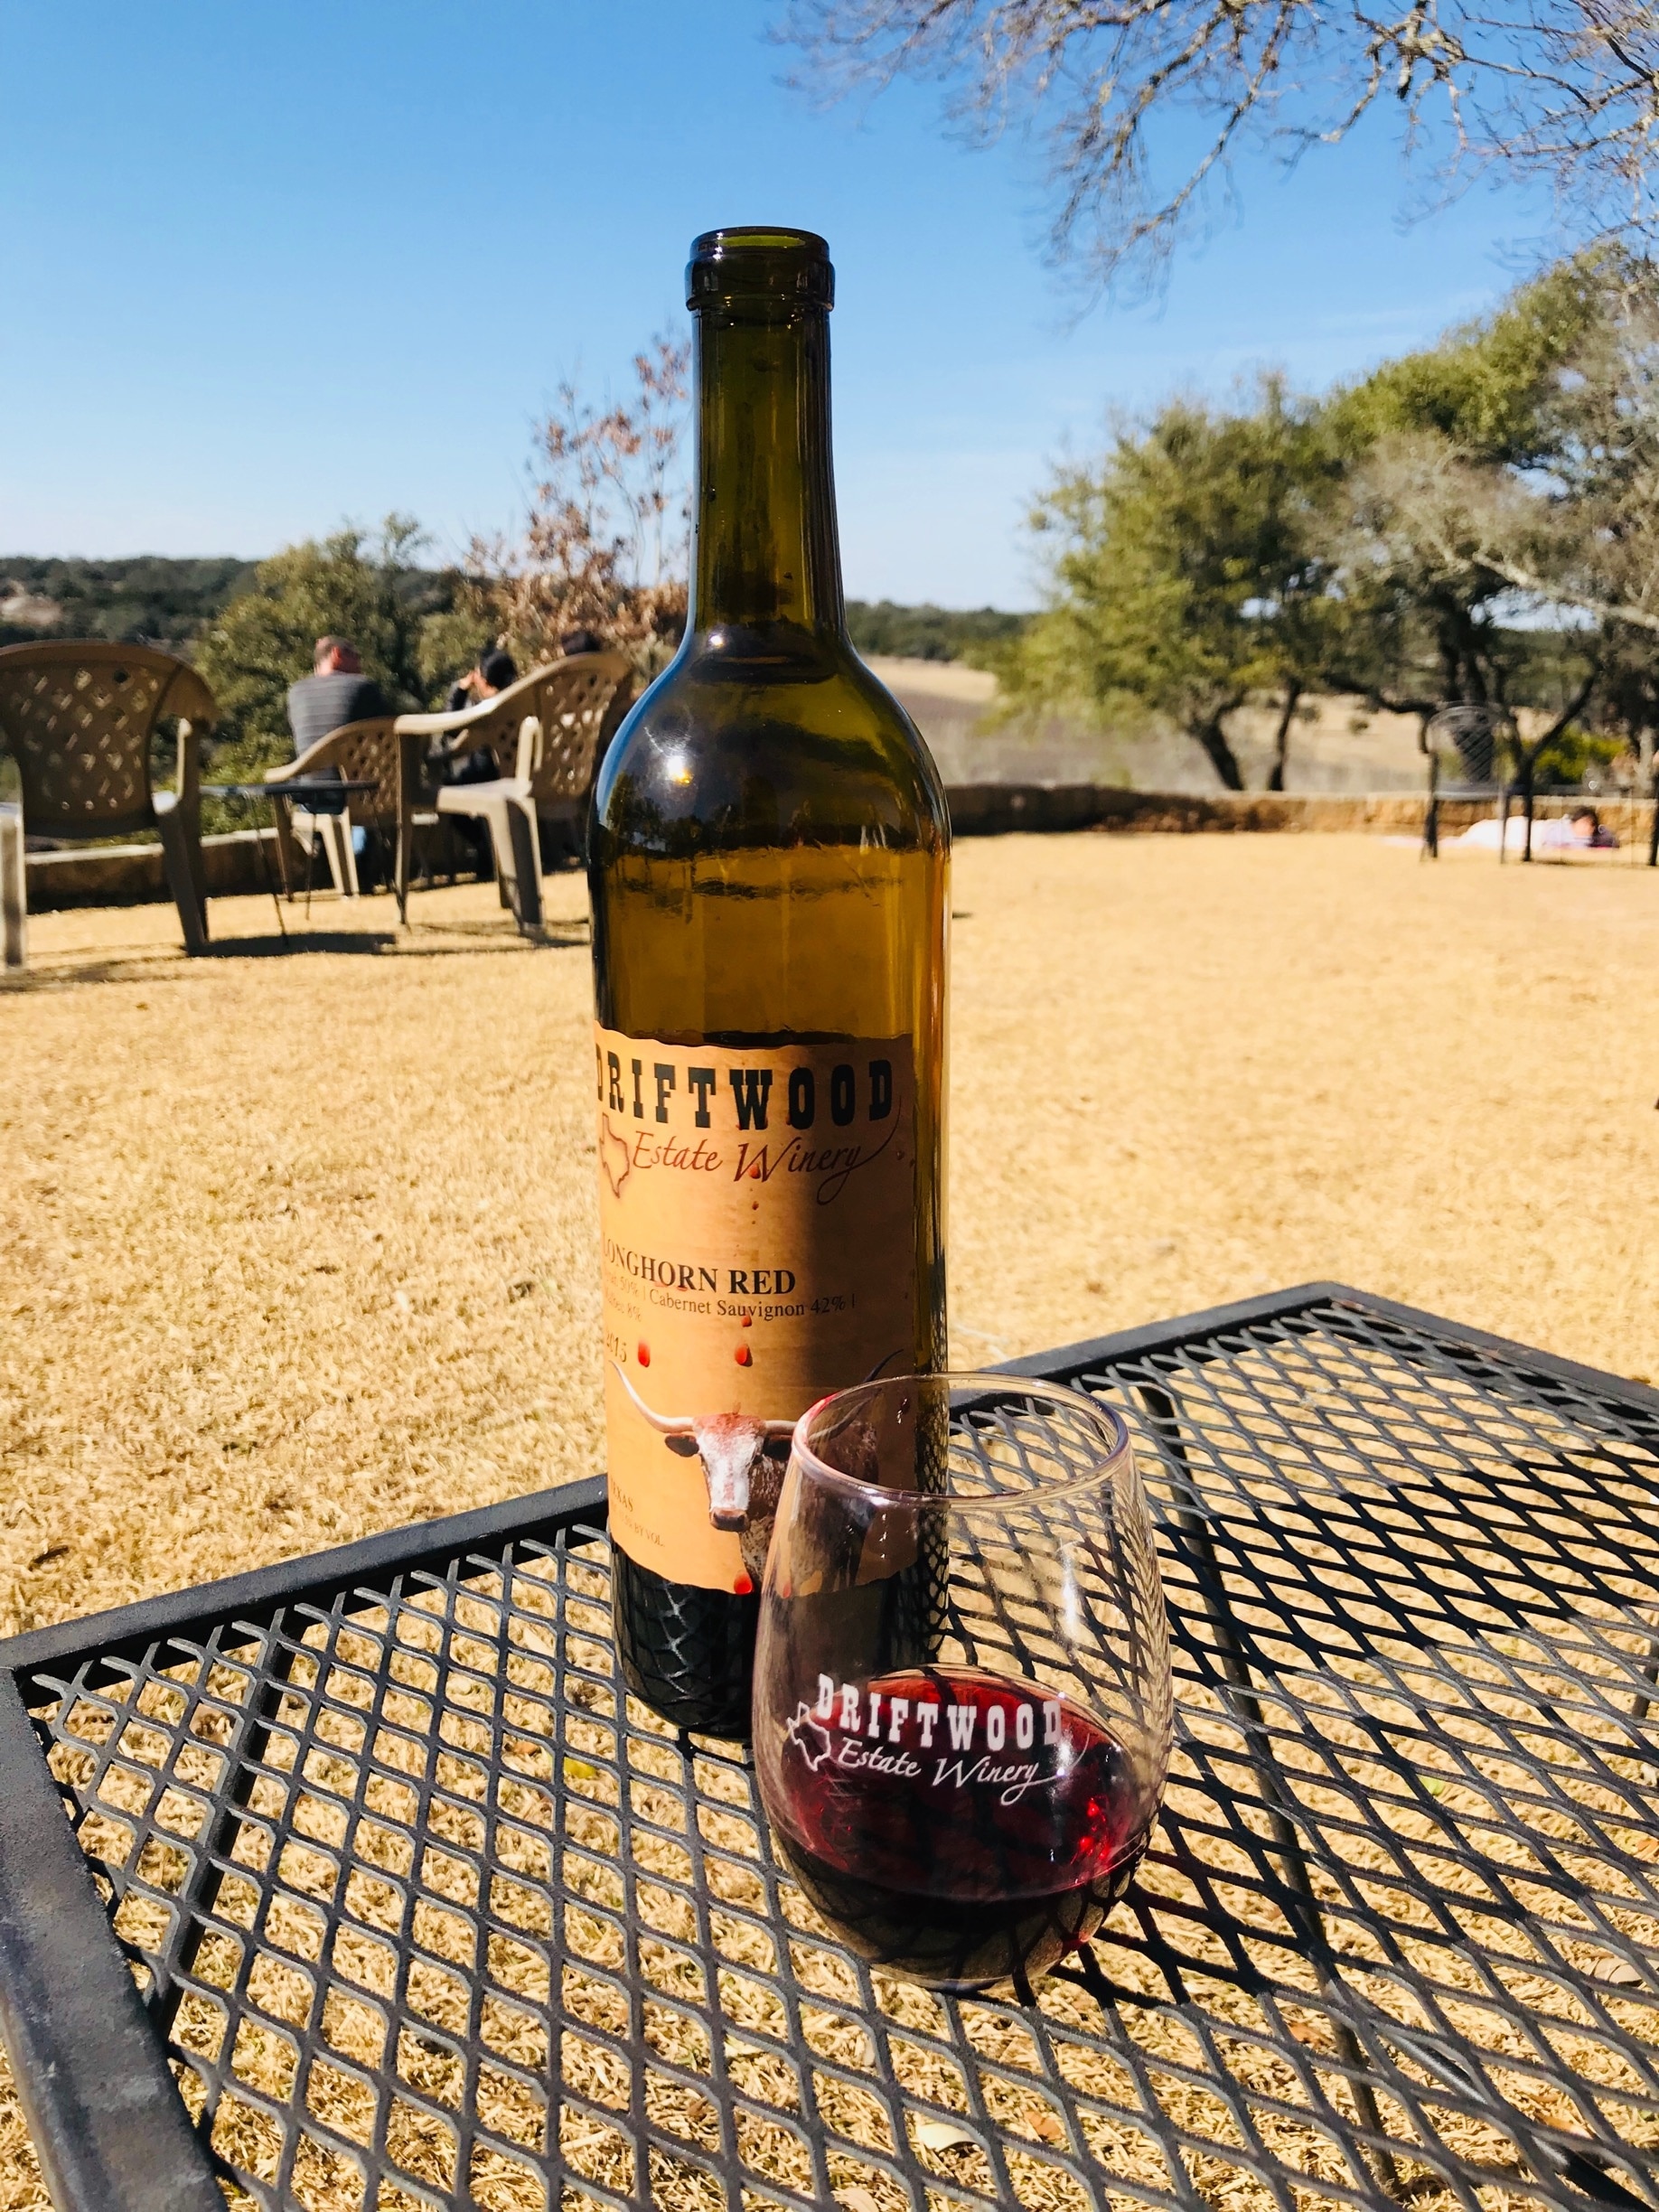 Driftwood Estate Winery. Bring a blanket and have a picnic with a bottle of wine #atx #hillcountry #longhornred